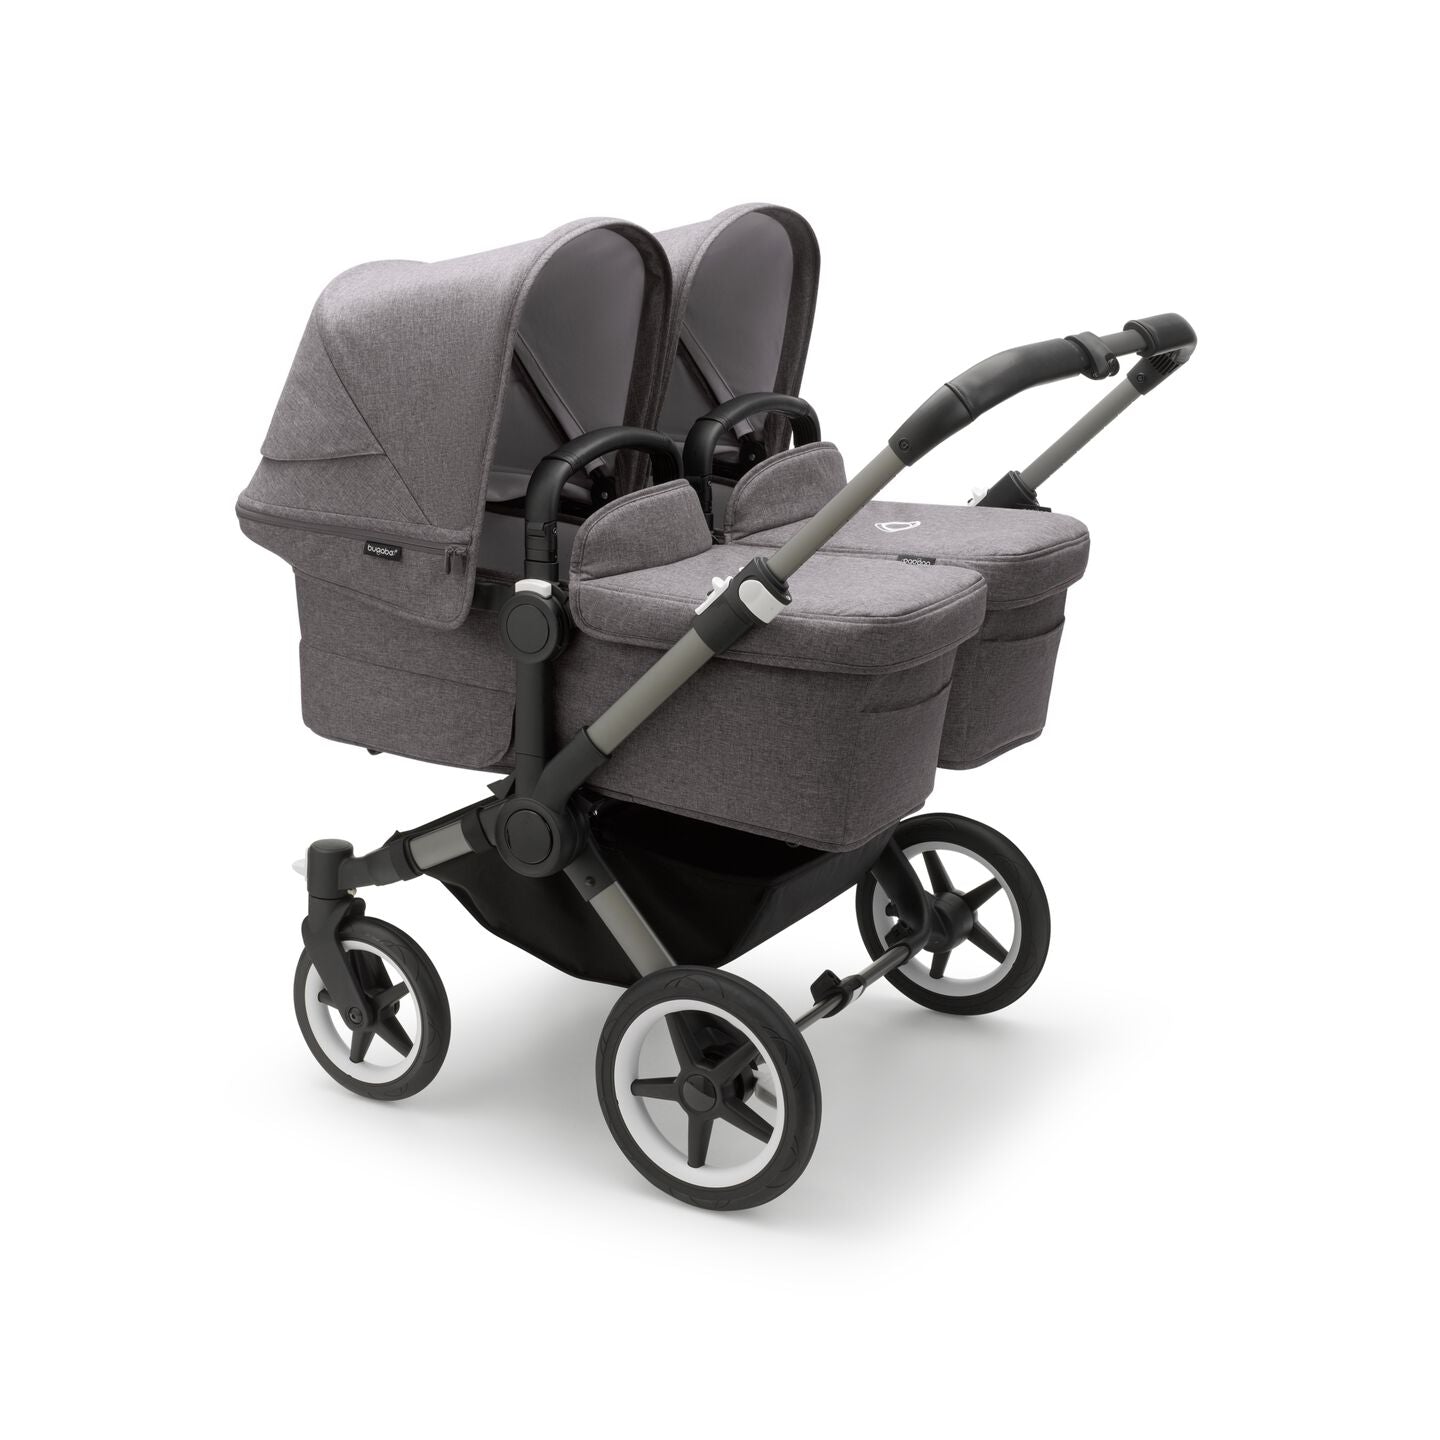 Bugaboo - Donkey 5 Twin Complete Me Travel System - Graphite/Grey Melange